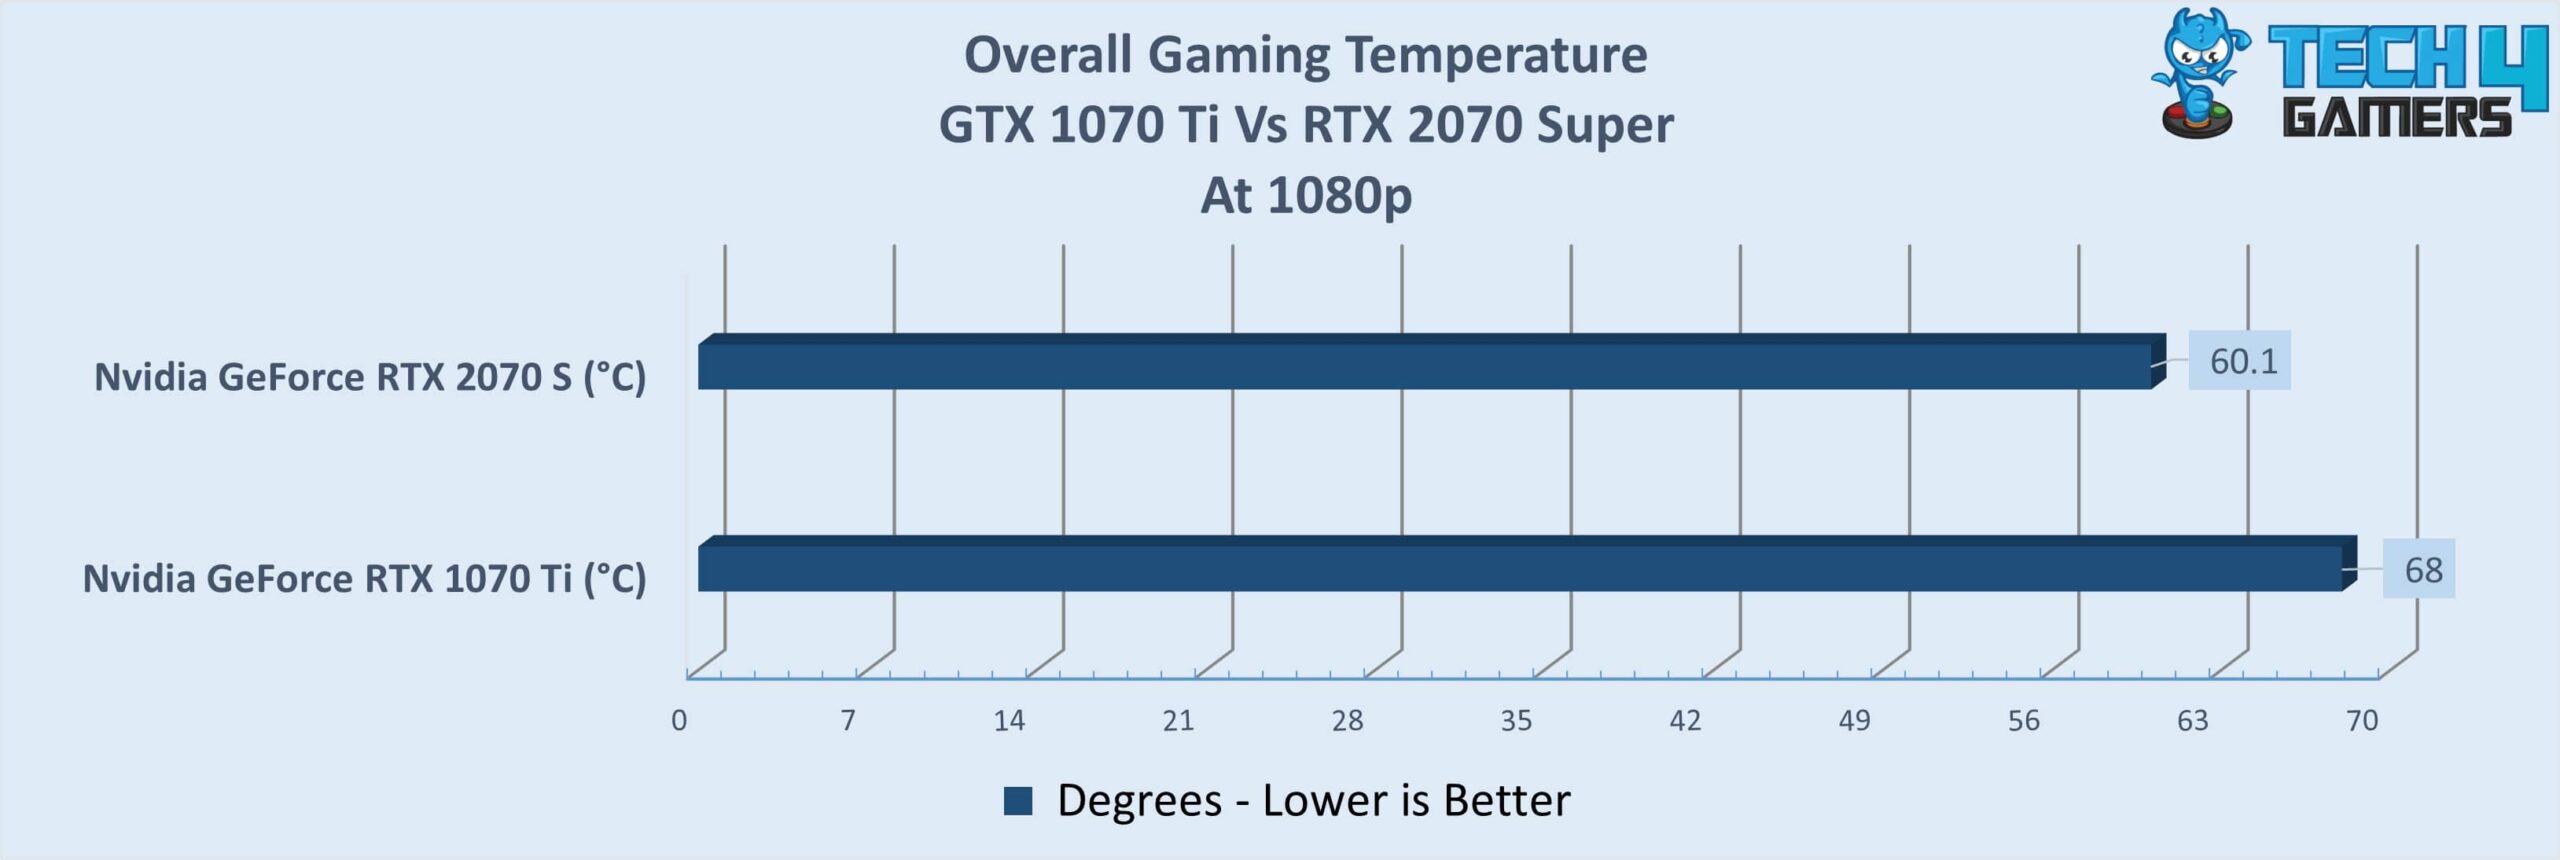 Overall Gaming Temperature of two GPUs at 1080p